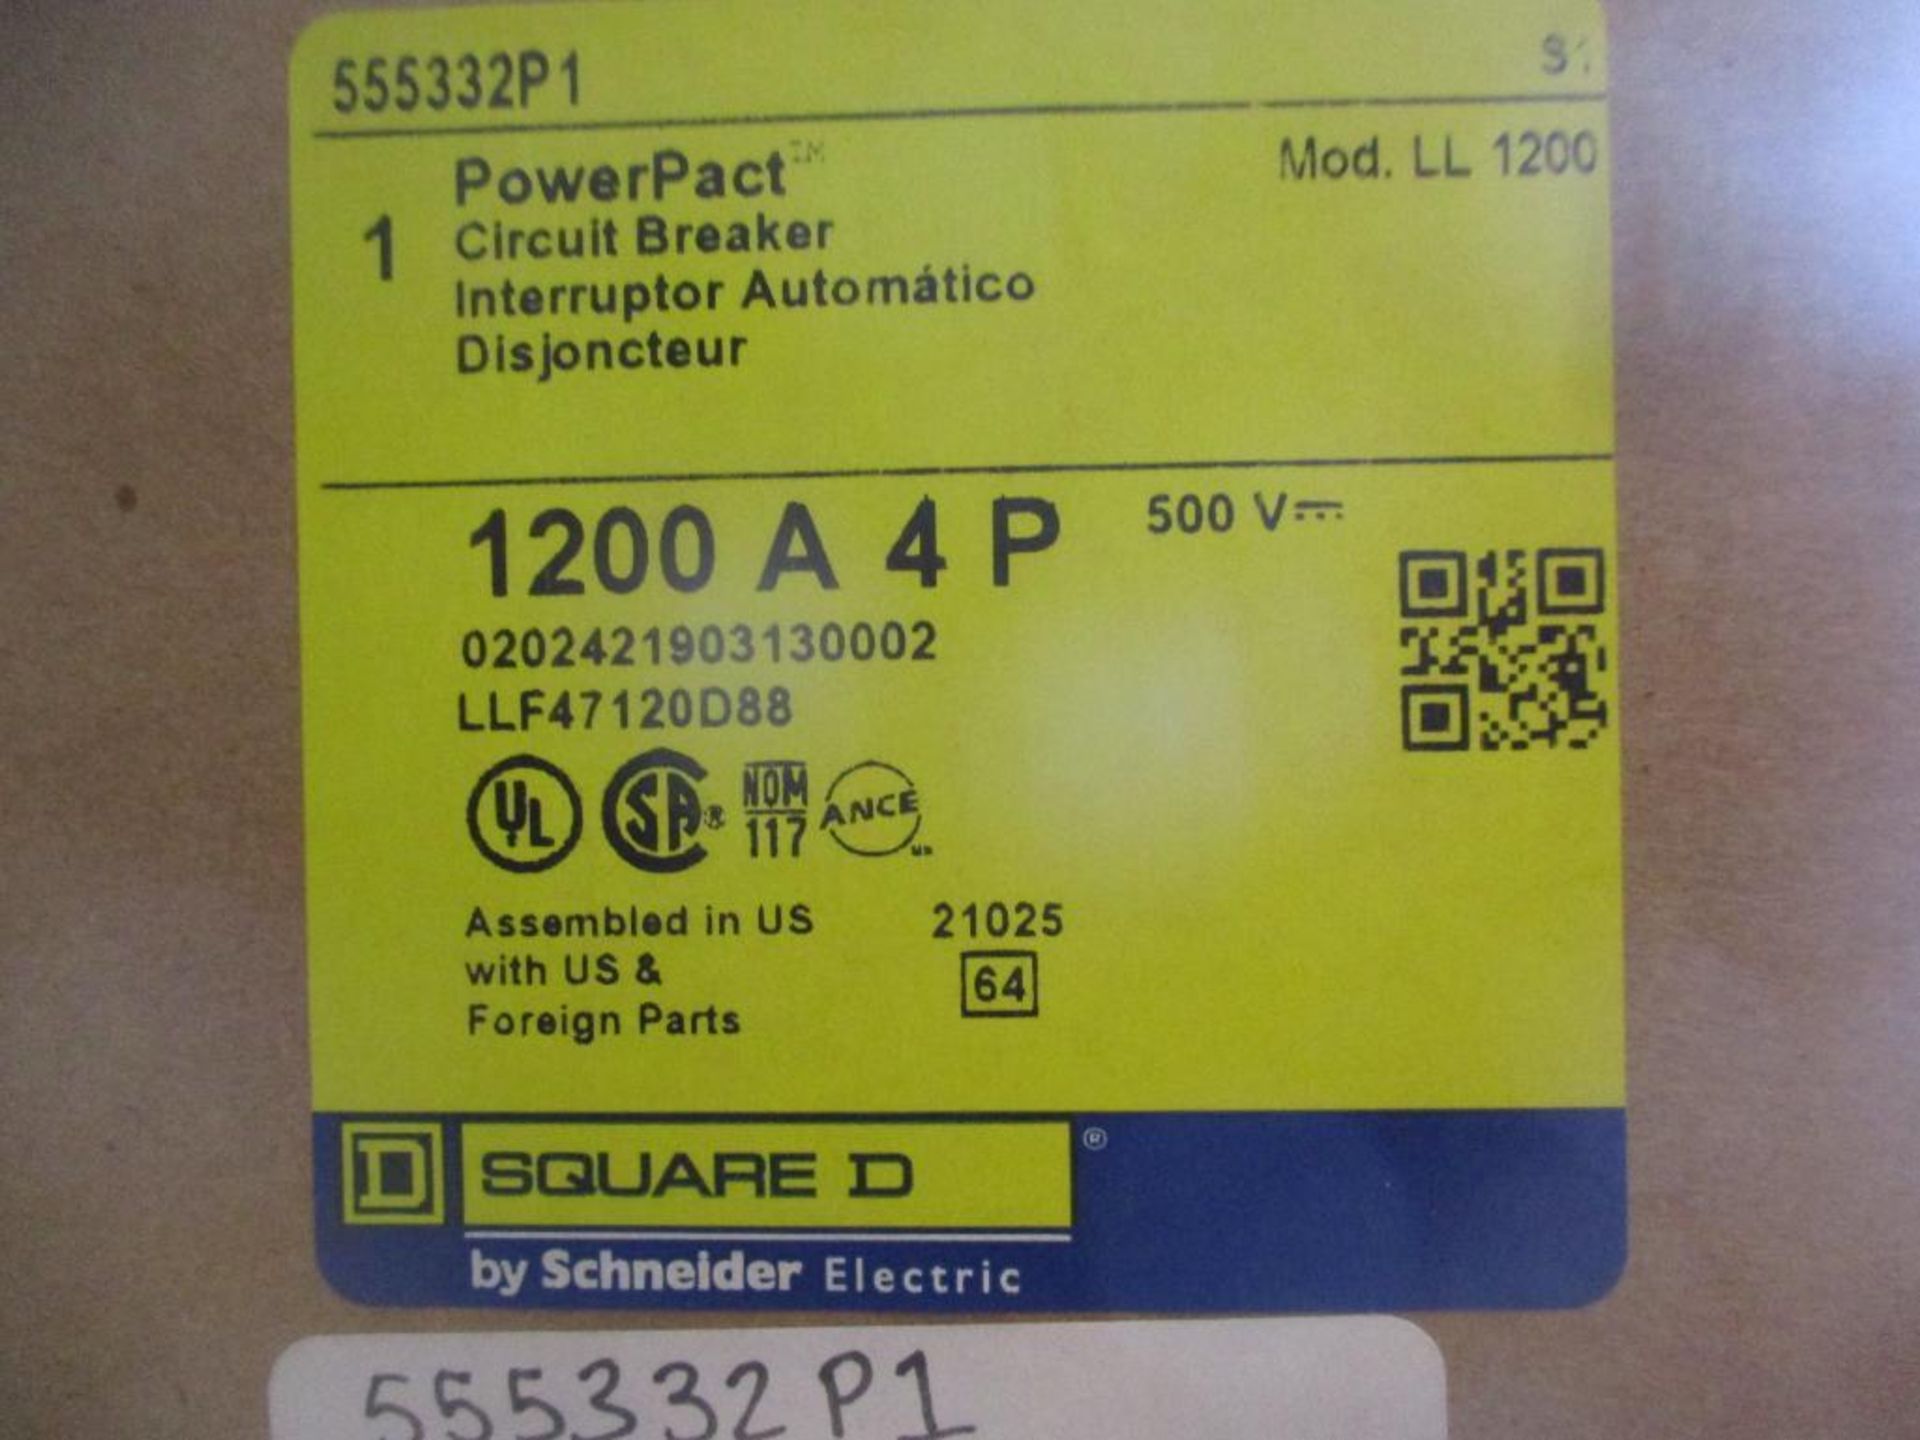 Square D 1200 AMP Circuit Breaker, 555332P1, 1200A,4P, PowerPacT LL 1200 (New in Box) - Image 4 of 4